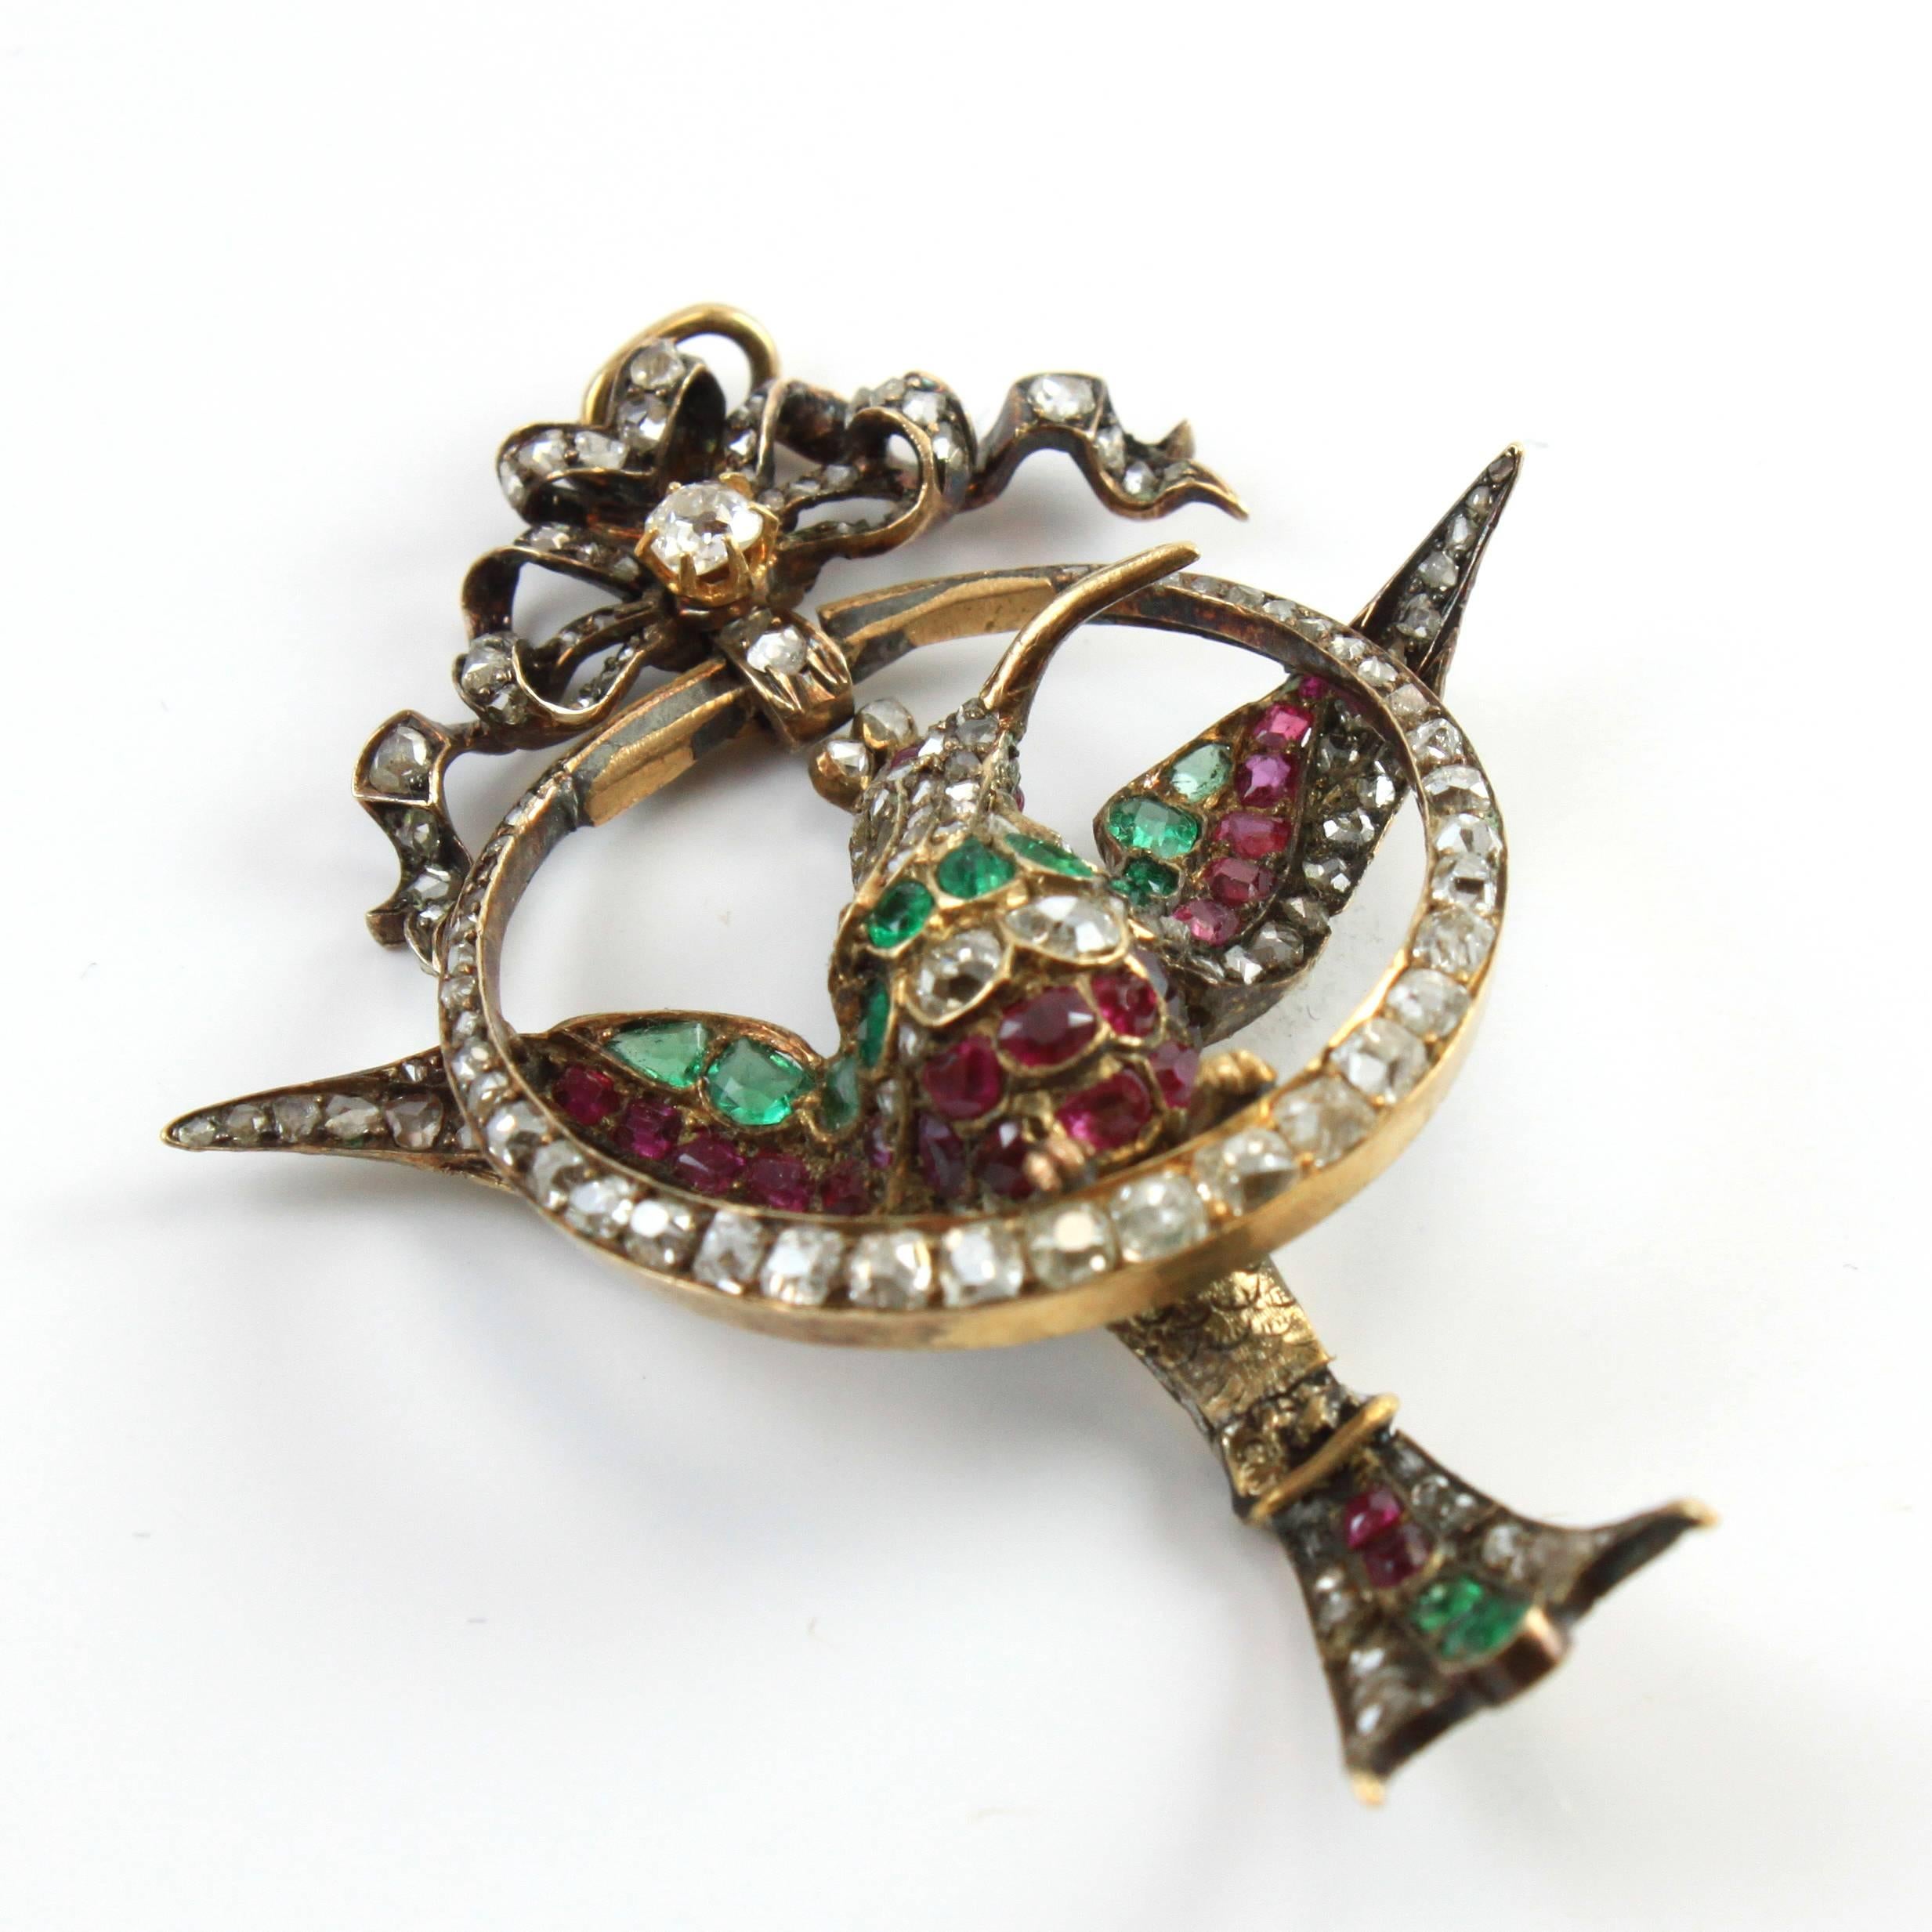 A stunning antique pendant in the form of a mockingbird, with old cut diamonds, rubies and emeralds. The craftsmanship is exceptional and as common during the time it is made in silver and gold. This pendant is a fascinating piece of jewellery and